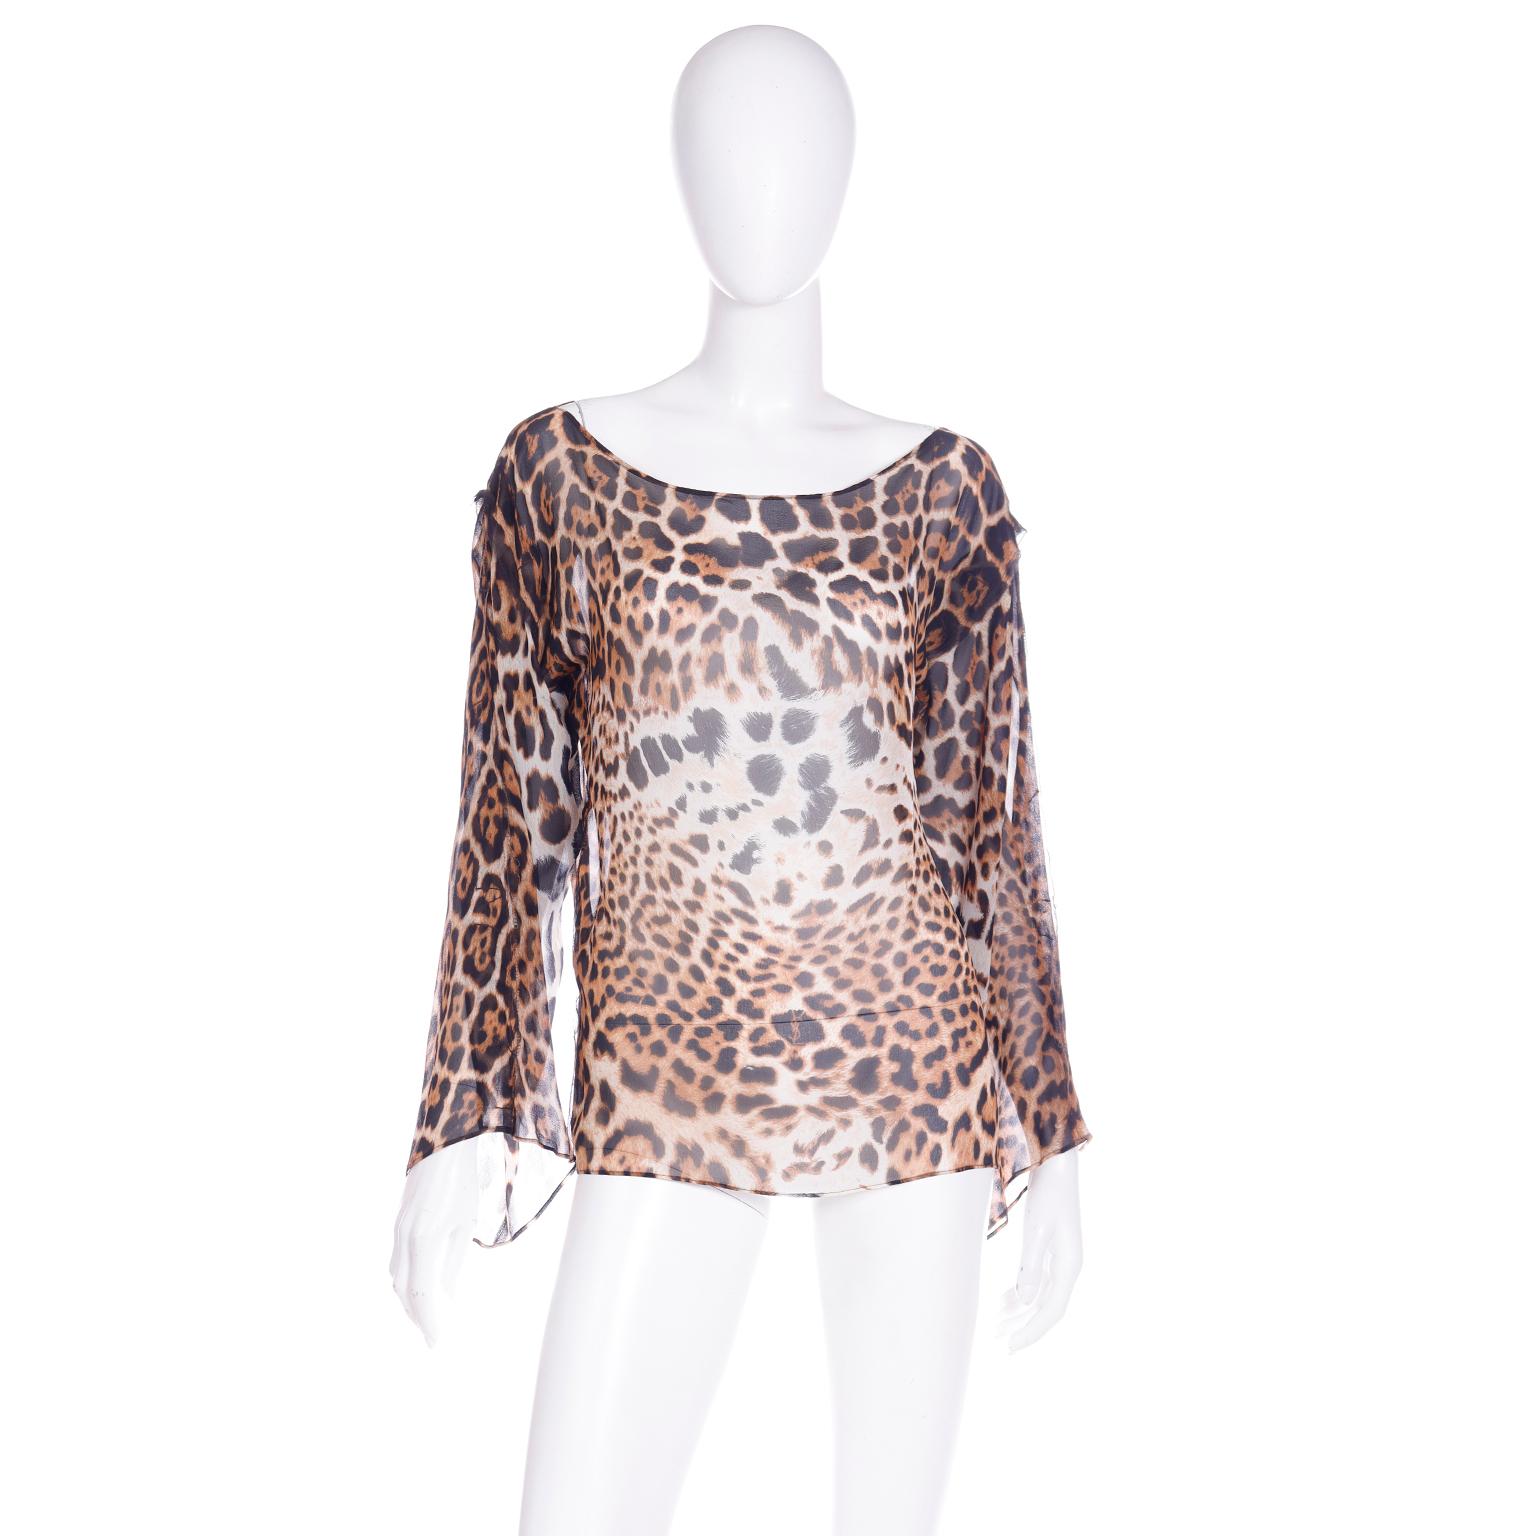 Tom Ford Yves Saint Laurent Spring Summer 2002 YSL Leopard Print Silk Runway Top In Excellent Condition For Sale In Portland, OR